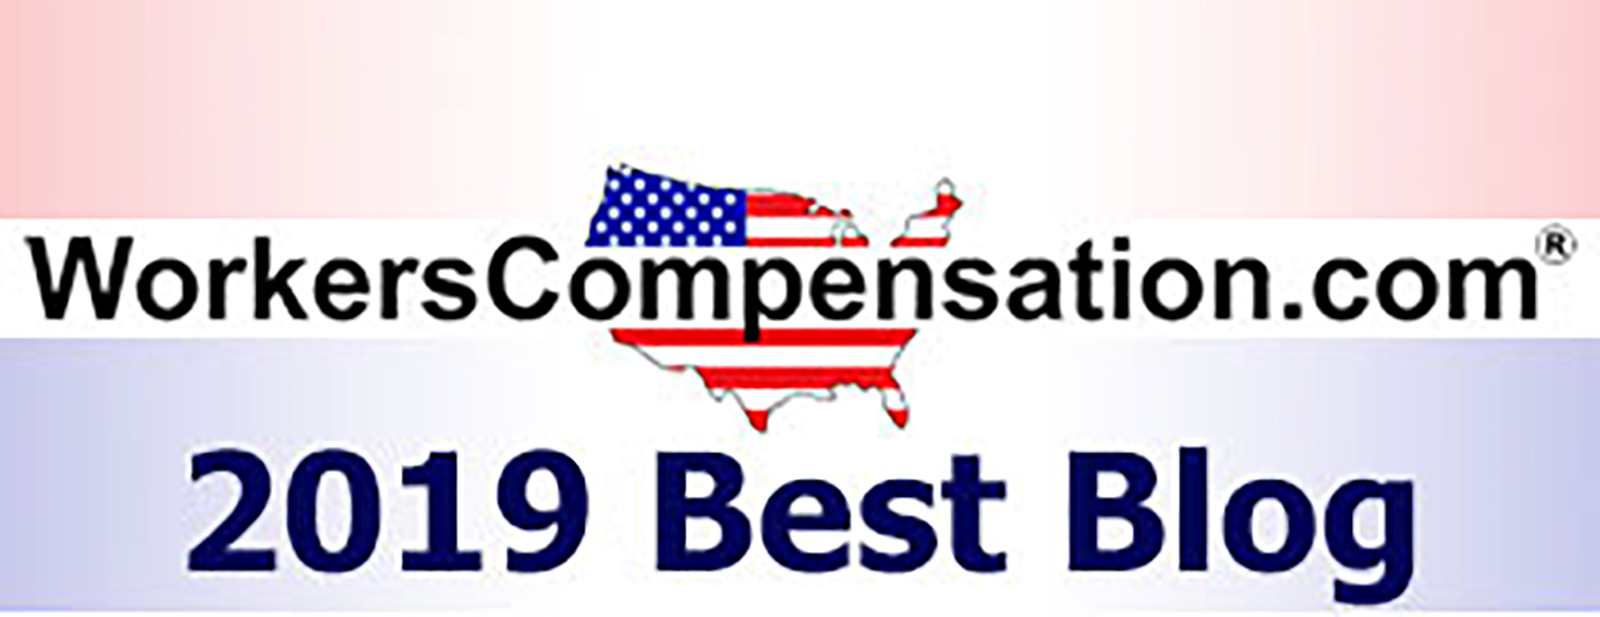 IWP Recognized as Workers' Compensation Best Blog